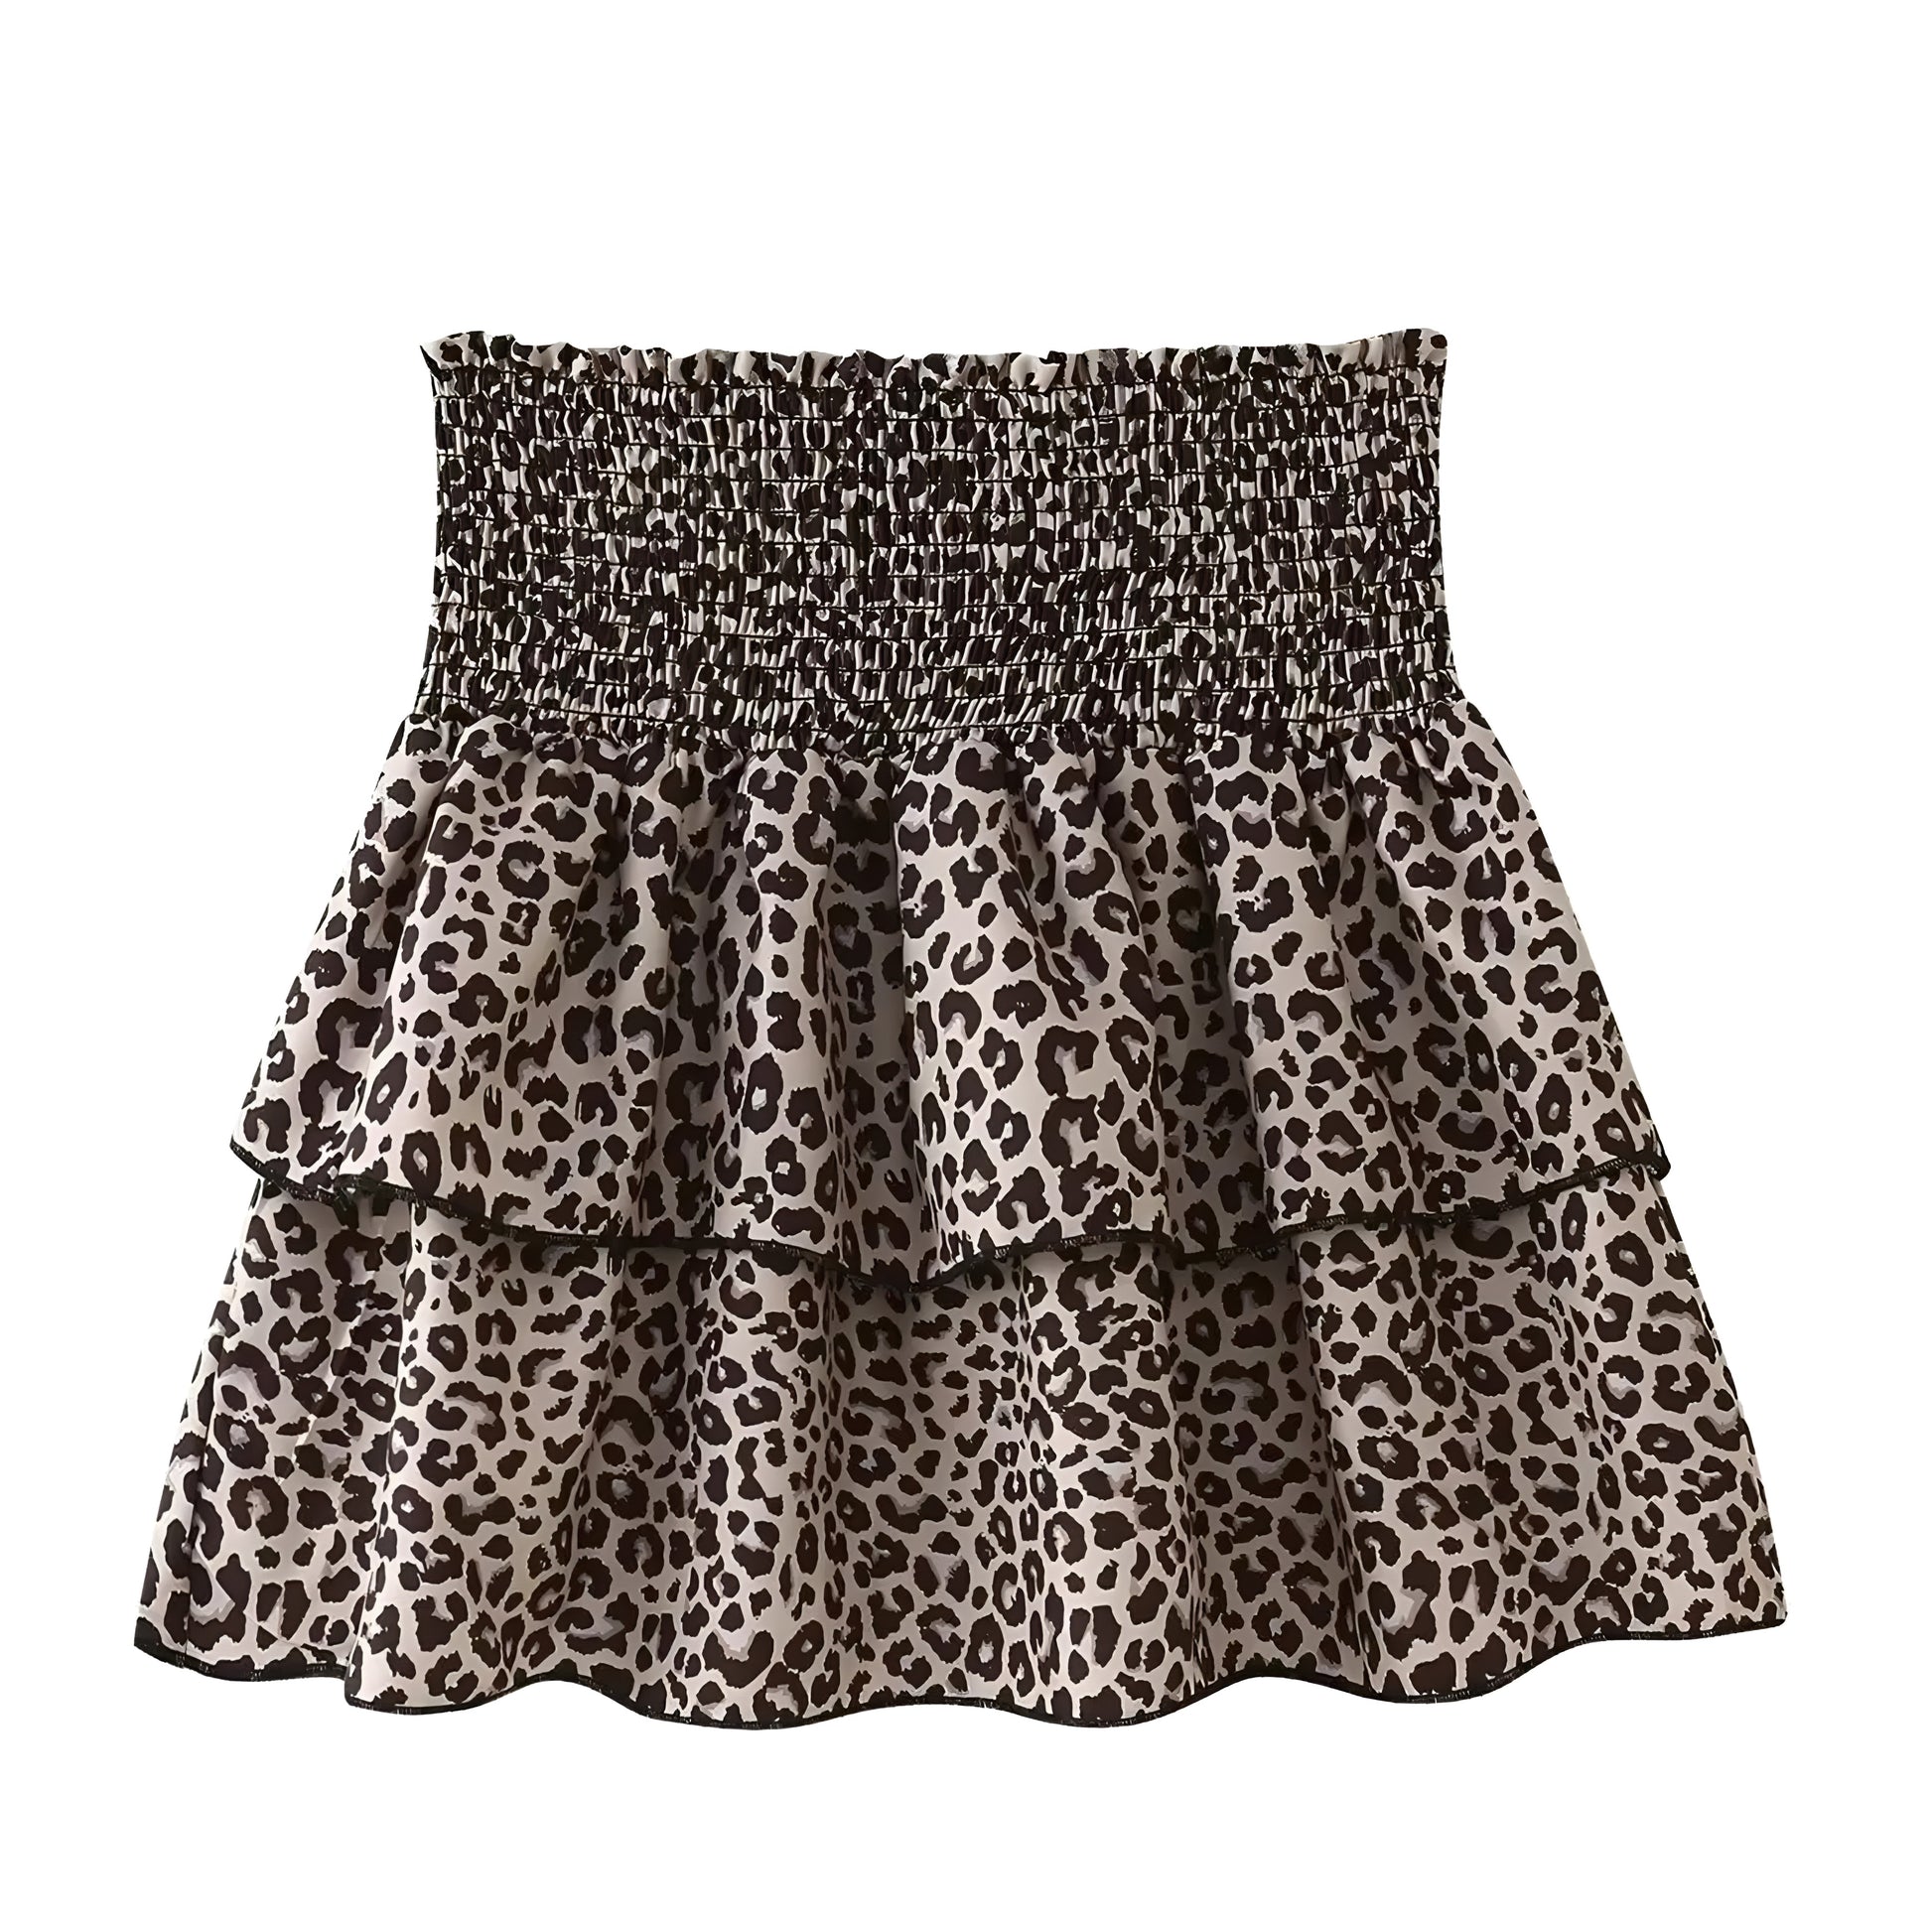 leopard-cheetah-animal-print-patterned-brown-black-multi-color-slim-fit-smocked-shirred-drop-waist-layered-ruffle-trim-low-mid-high-rise-waisted-tiered-flowy-tutu-tullie-linen-boho-bohemian-short-mini-skirt-skort-women-ladies-teens-tweens-chic-trendy-spring-2024-summer-elegant-casual-semi-formal-feminine-classy-preppy-cocktail-party-night-out-club-wear-stockholm-style-tropical-vacation-beach-wear-skirts-zara-revolve-subdued-aritzia-altard-state-dupe